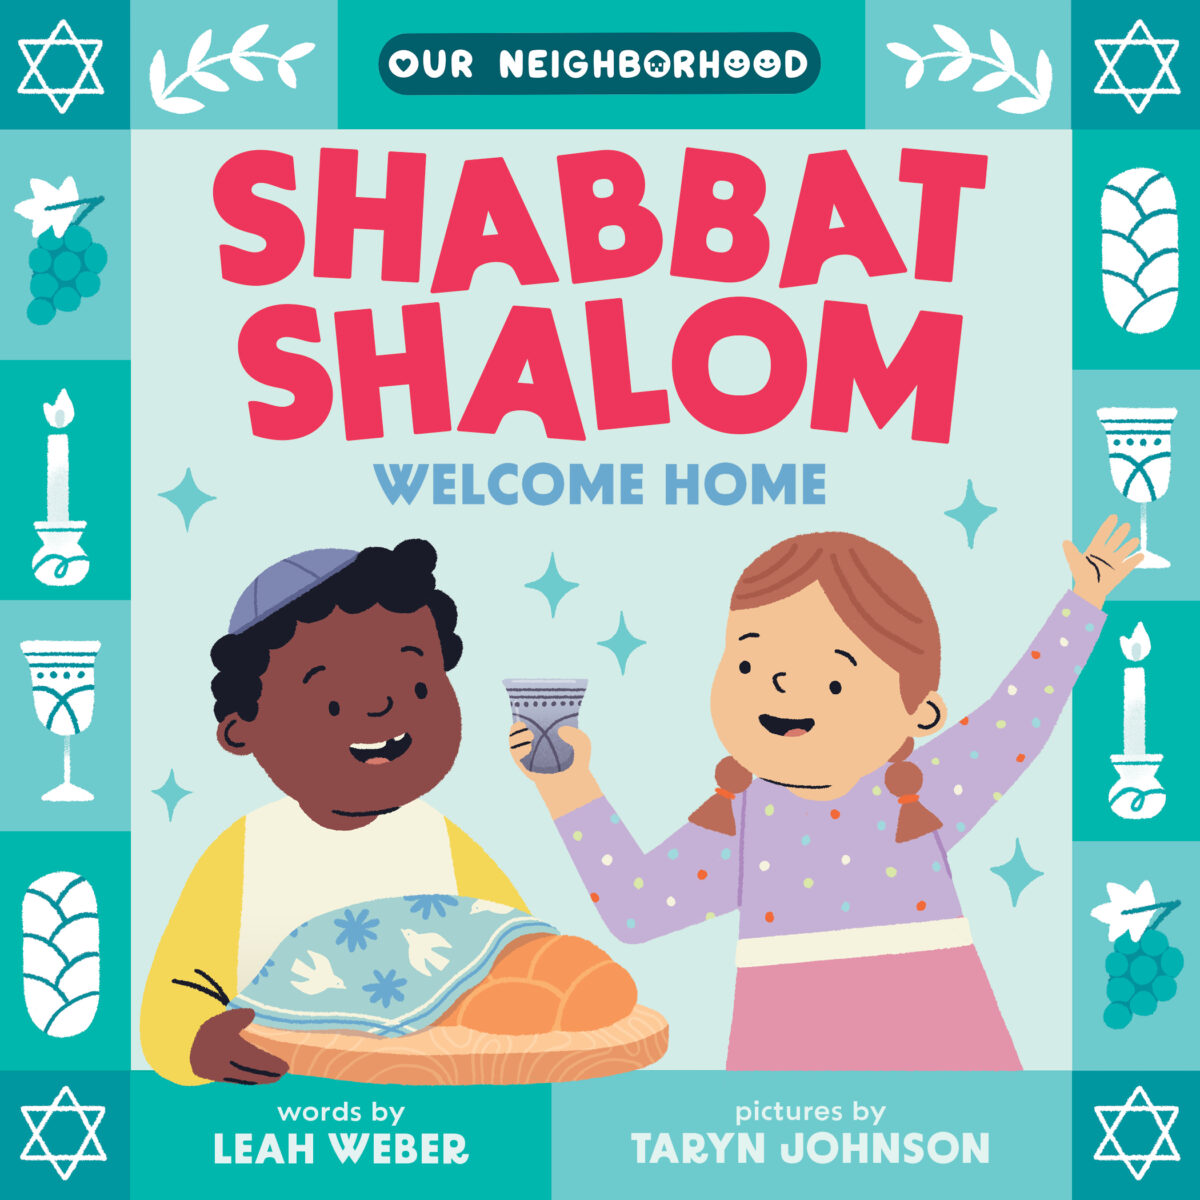 Shabbat Shalom, Welcome Home (An Our Neighborhood Series Board Book for Toddlers Celebrating Judaism)